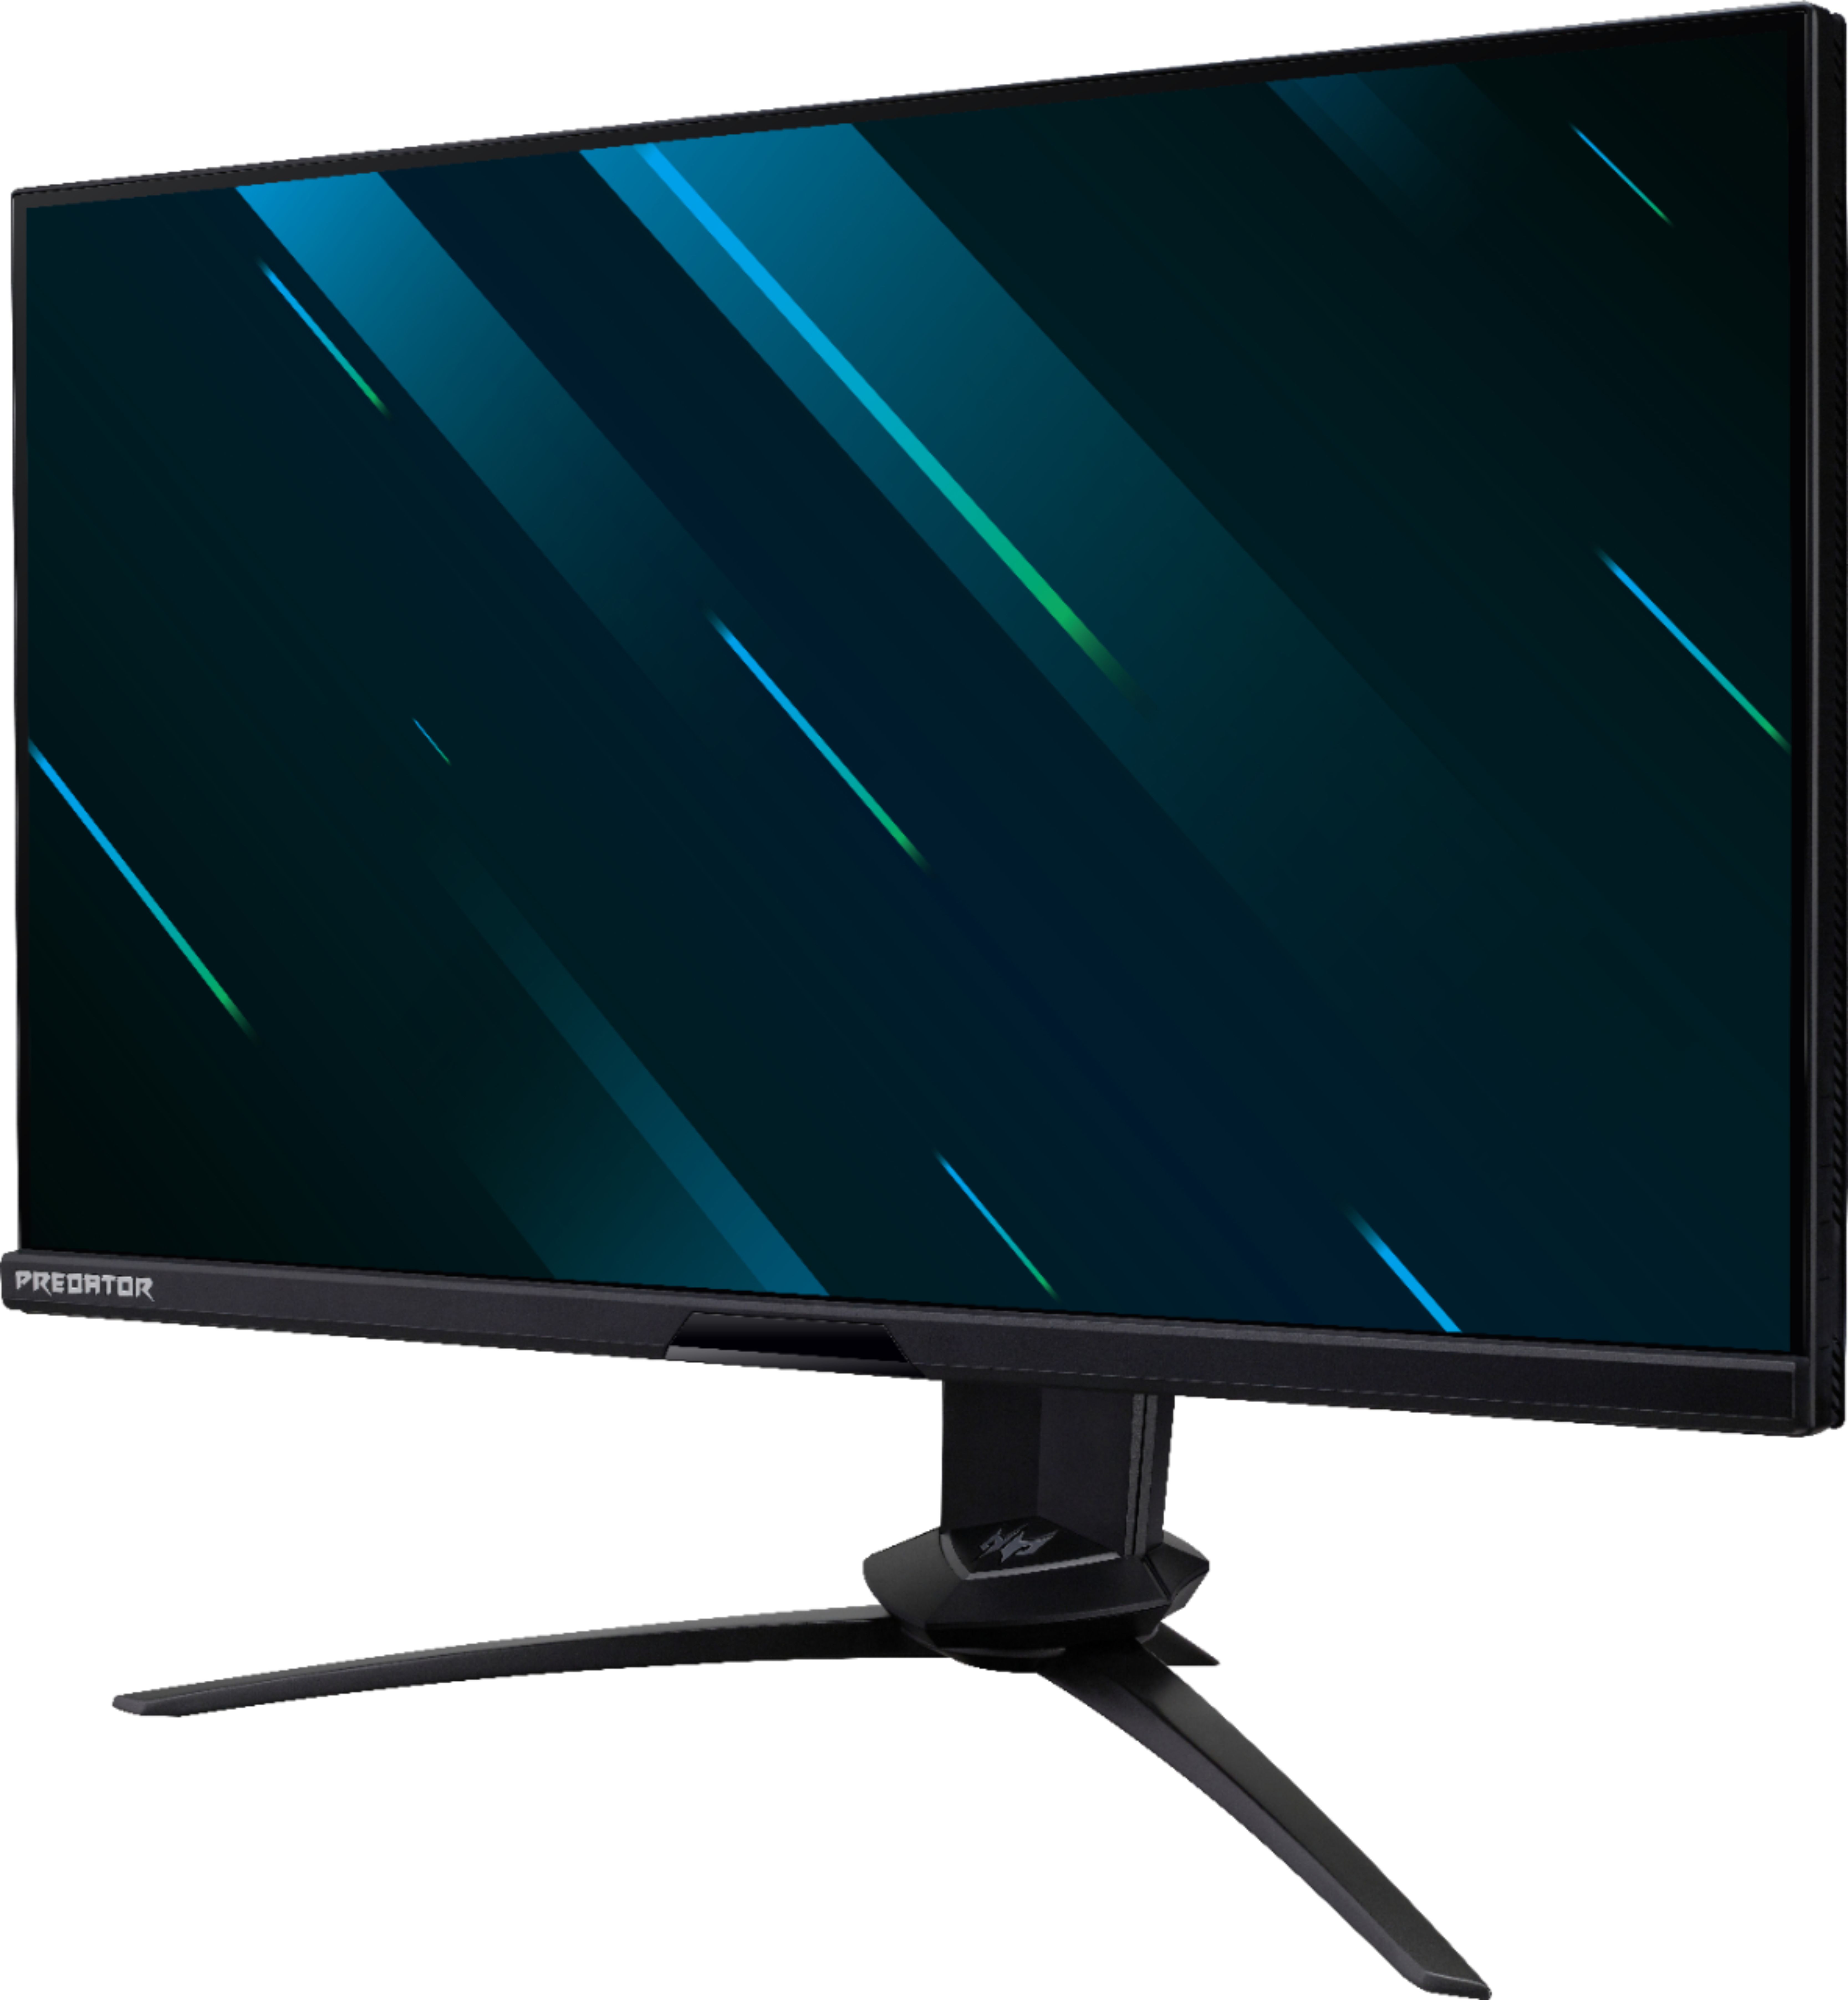 Acer Predator X25 360 Hz Monitor Review: Raw Power and Speed for eSports